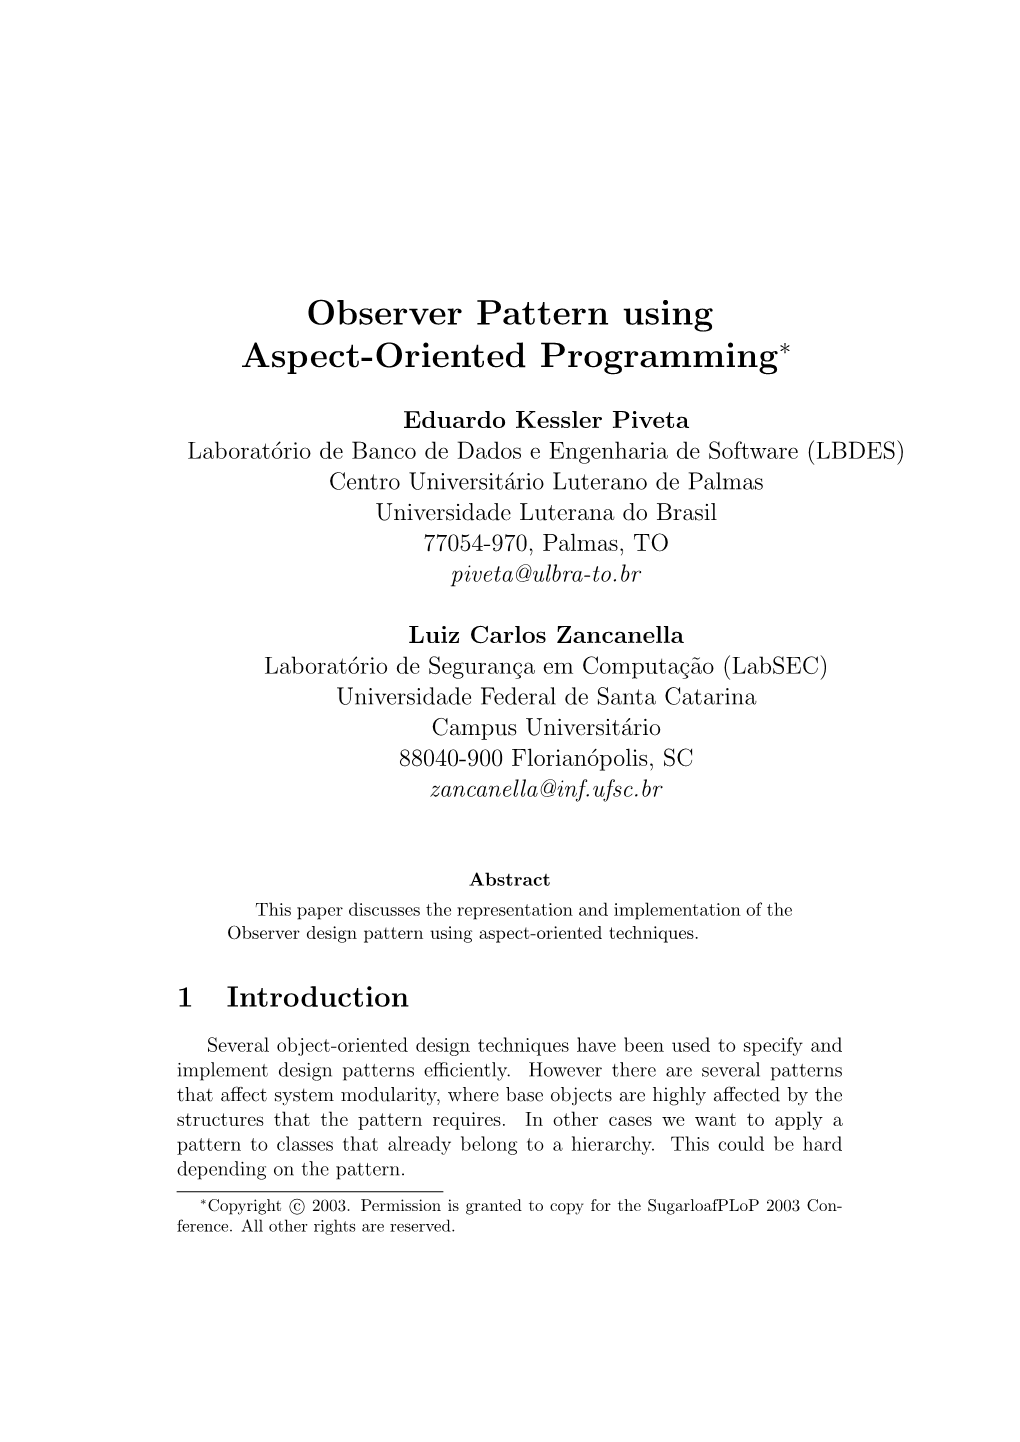 Observer Pattern Using Aspect-Oriented Programming∗